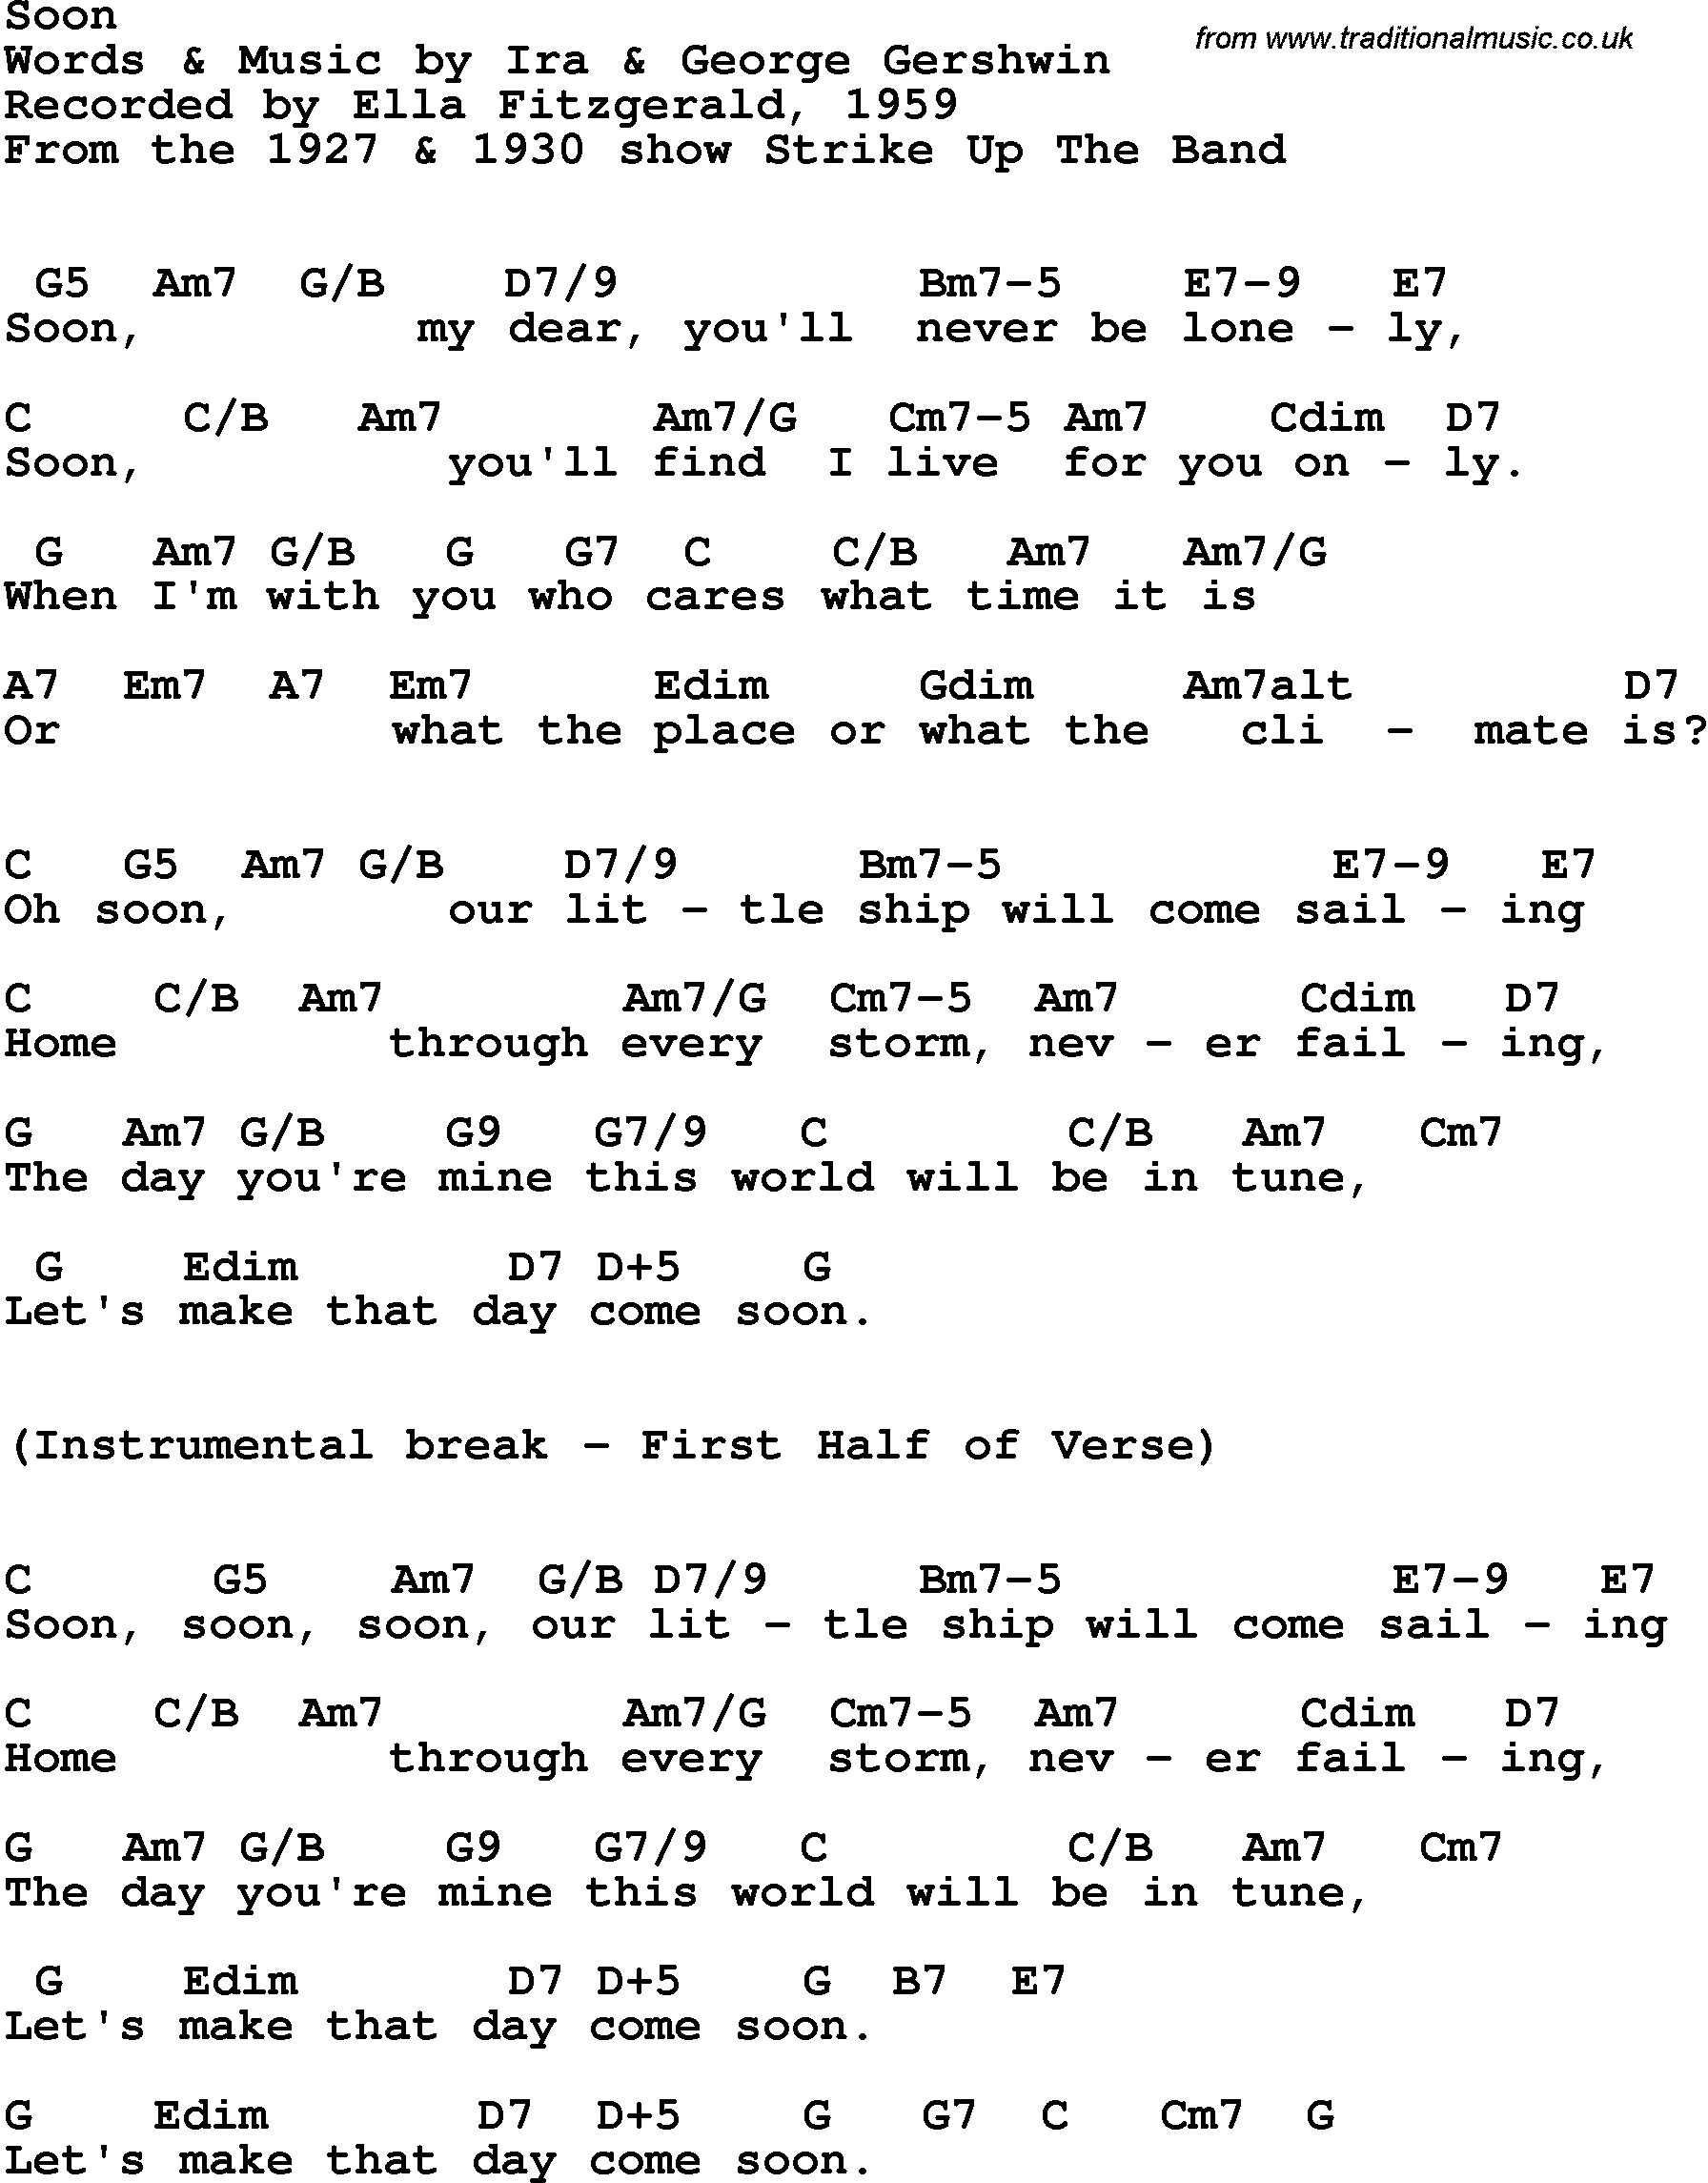 Song Lyrics with guitar chords for Soon - Ella Fitzgerald, 1959